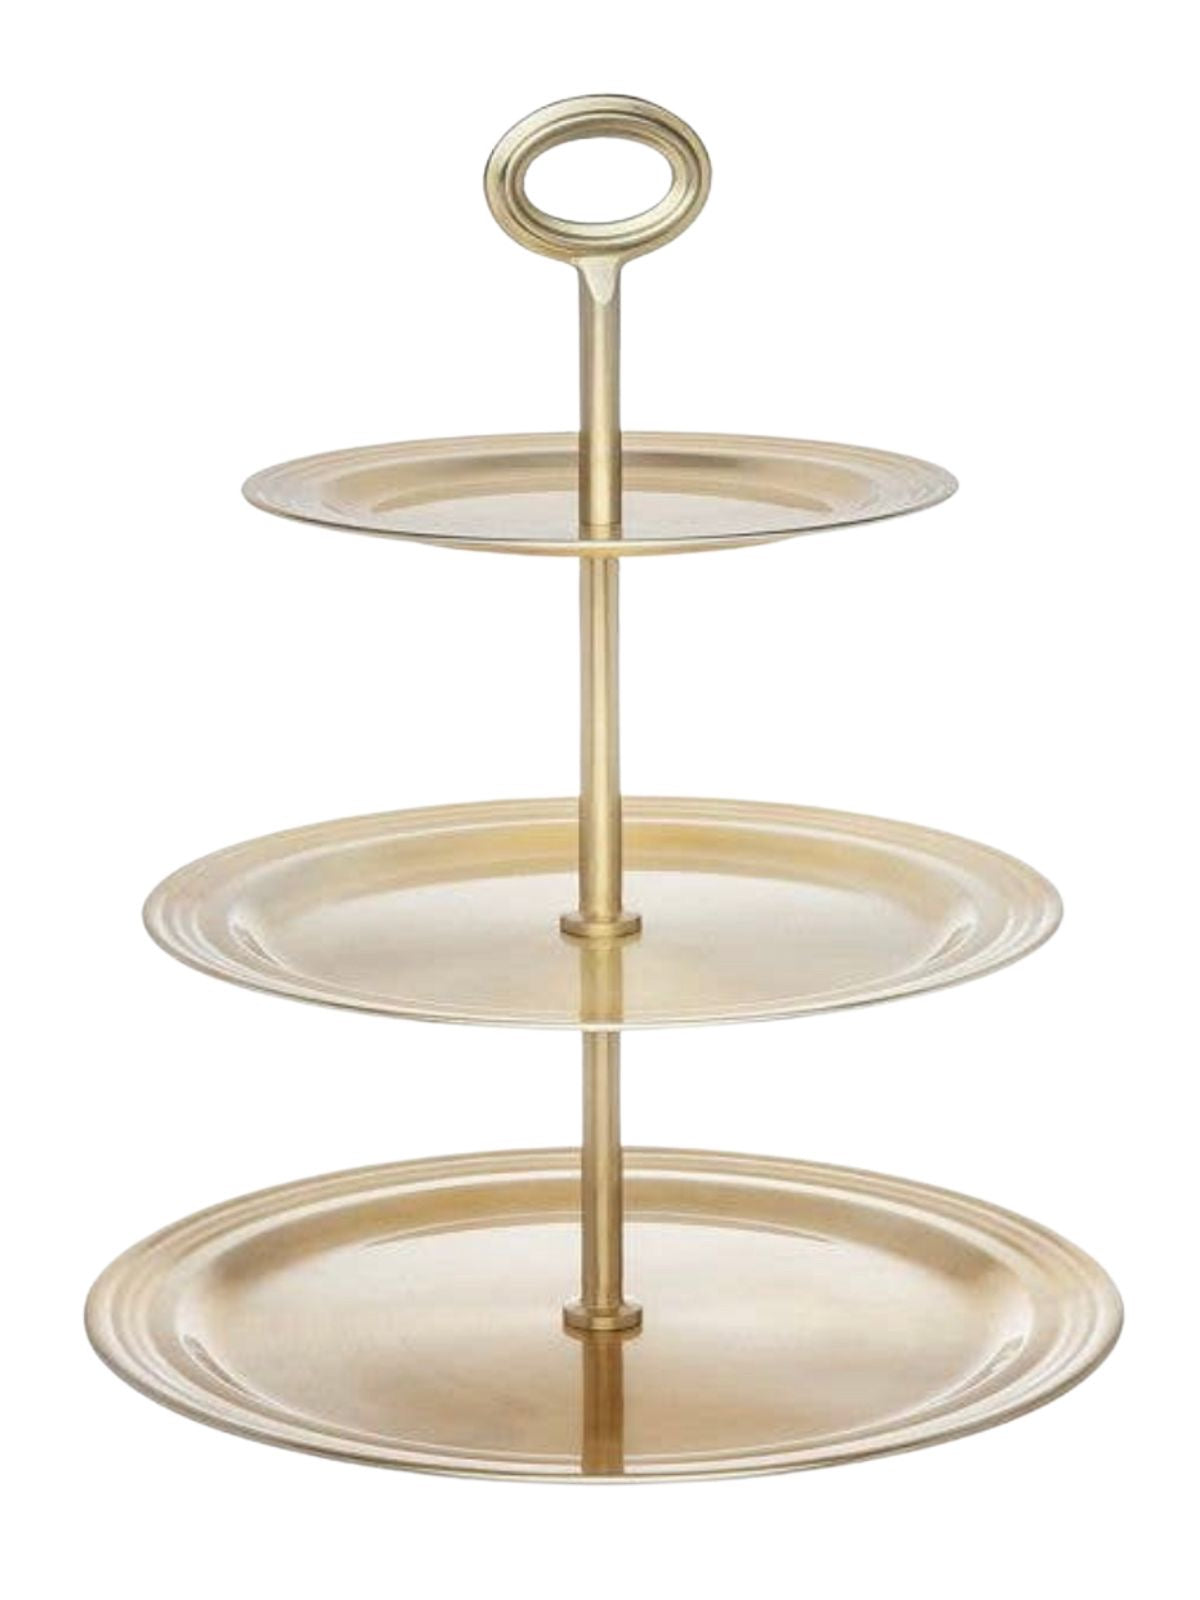 Revere Champagne Gold 3 Tier Stainless Steel Cake Stand sold by KYA Home Decor.